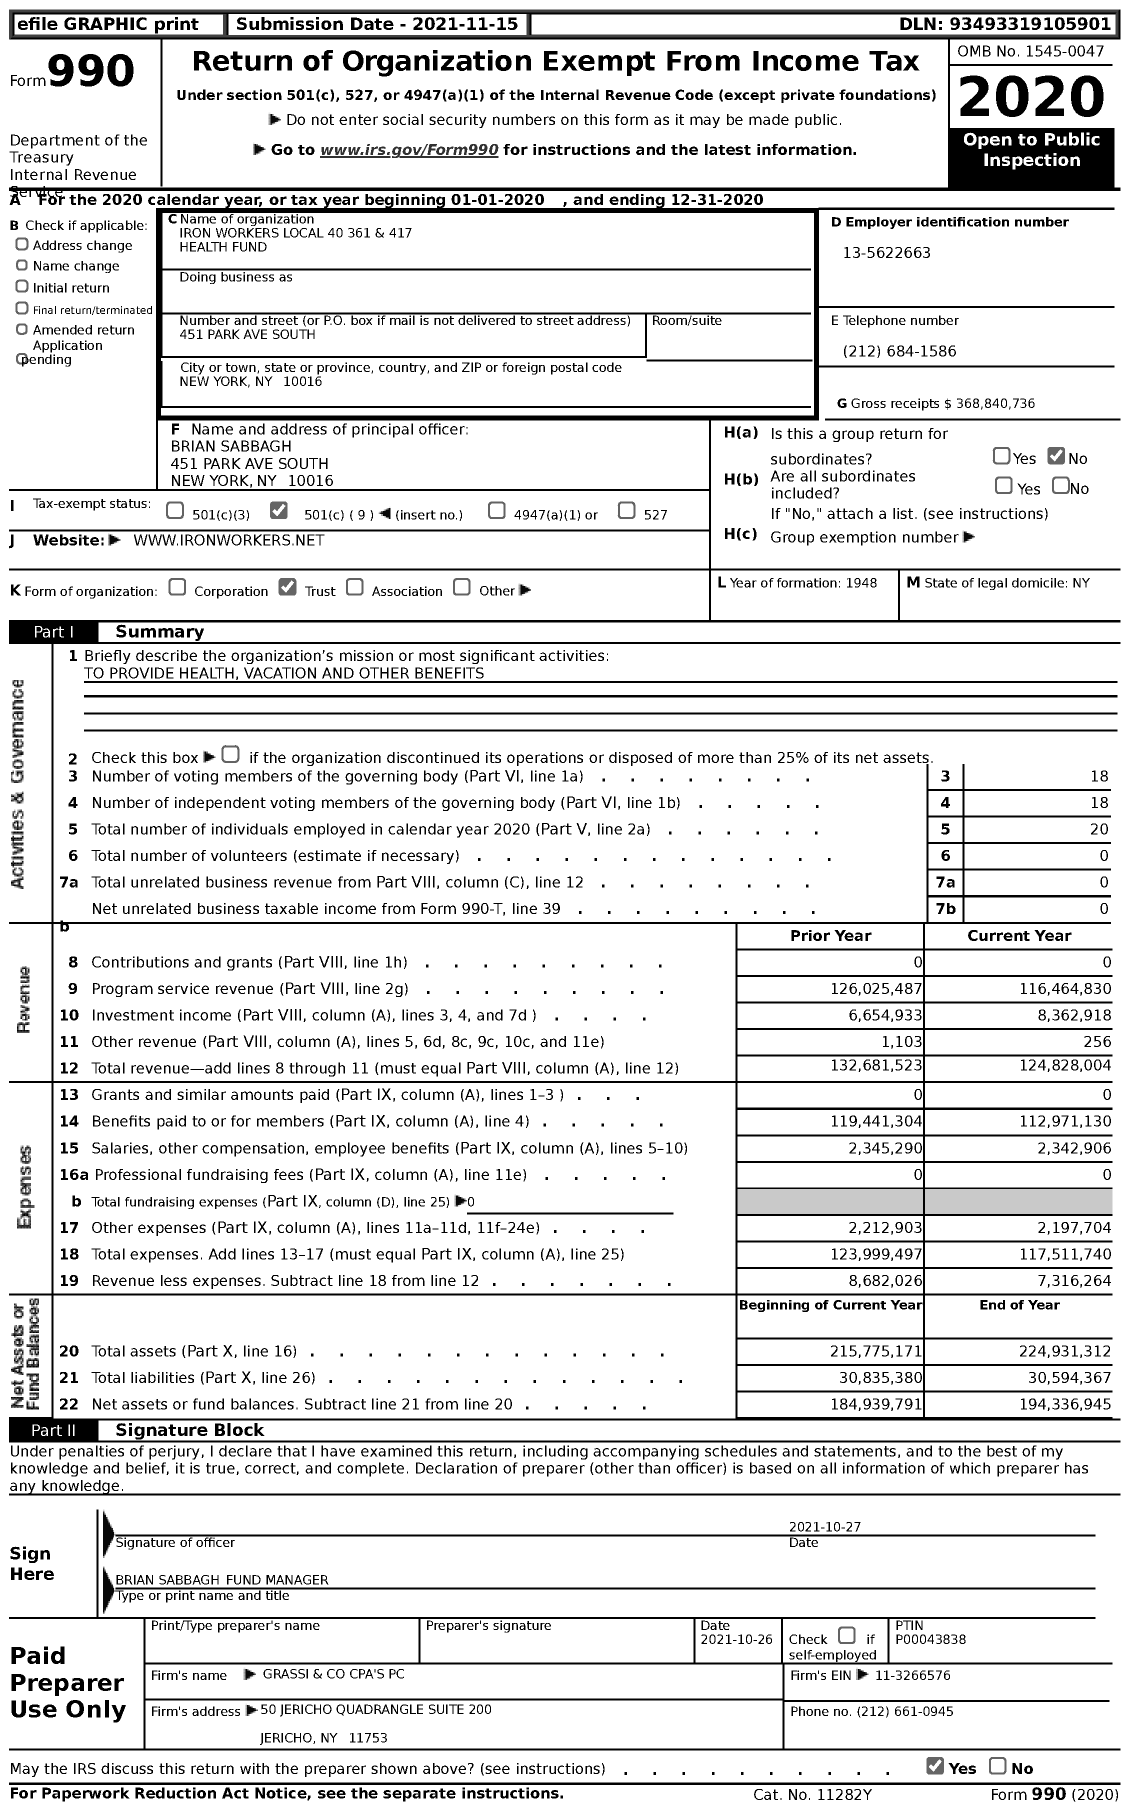 Image of first page of 2020 Form 990 for Iron Workers Local 40 361 and 417 Health